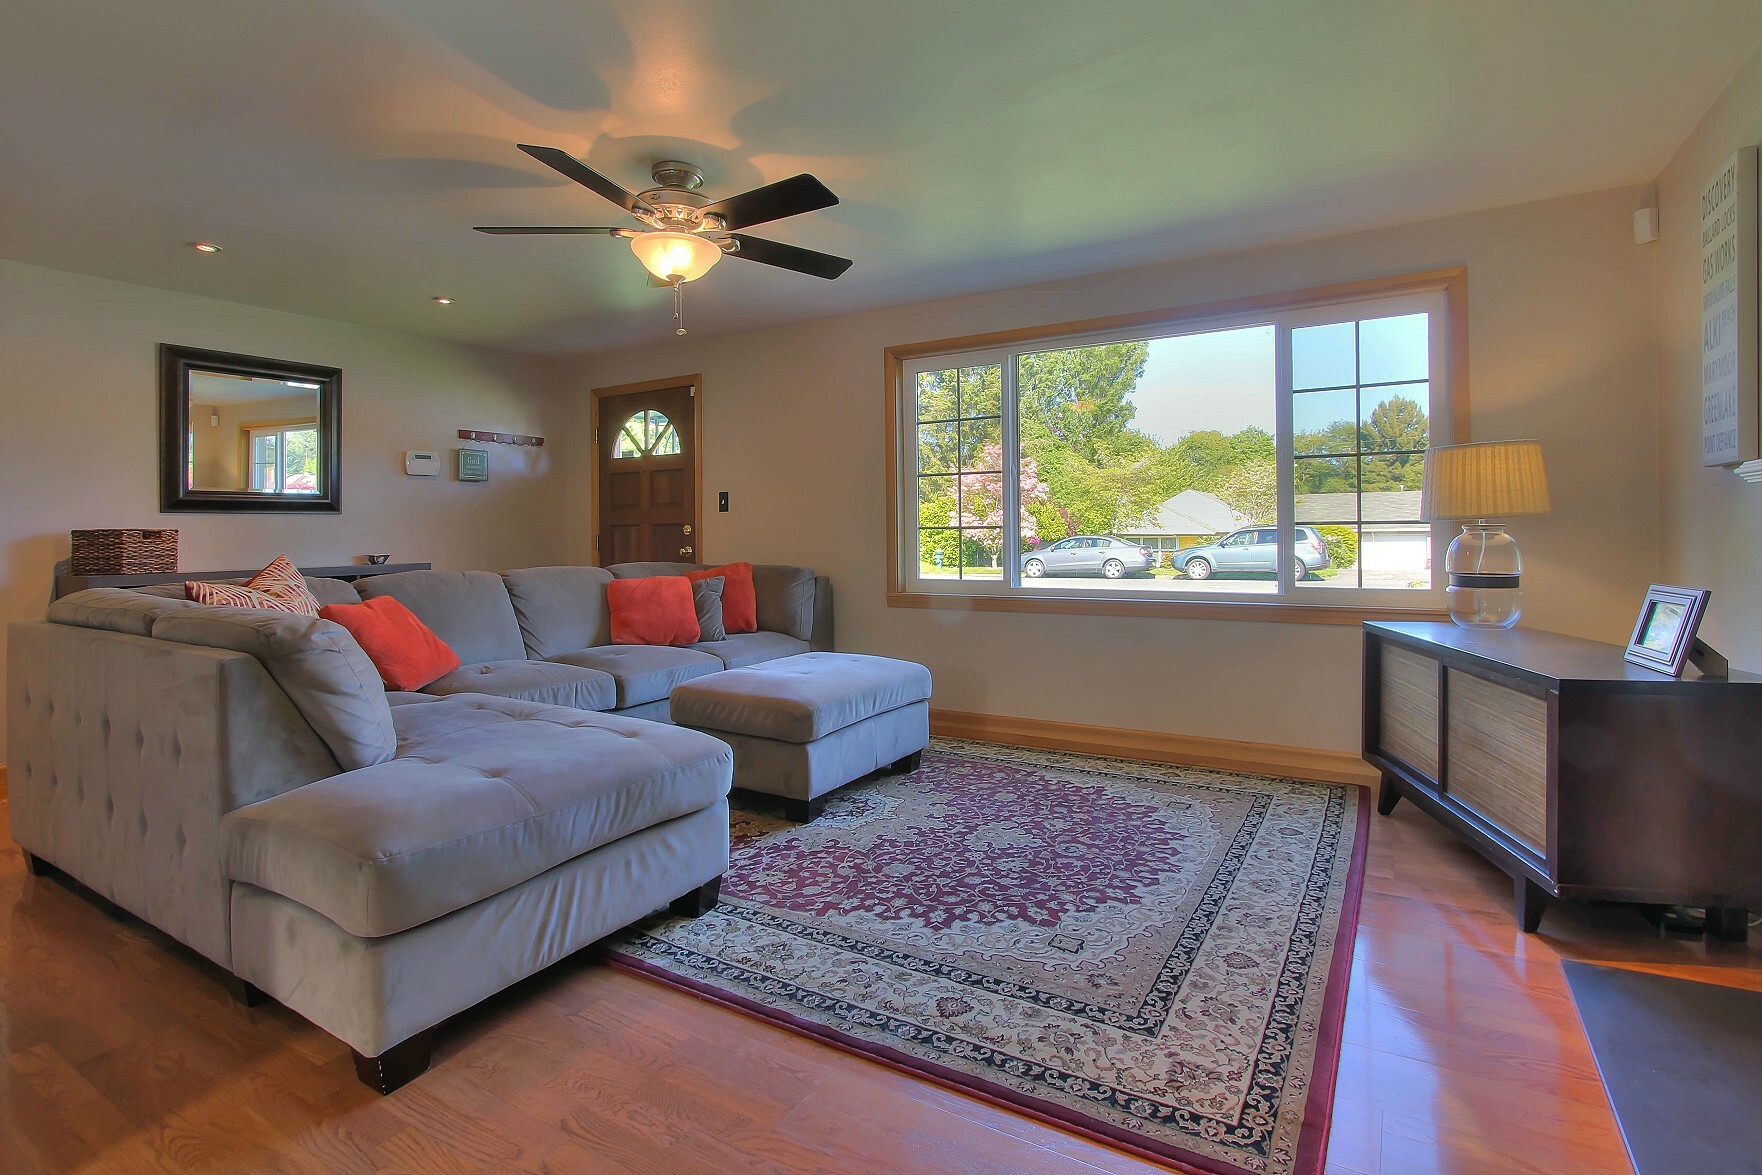 Property Photo: Living room 10039 Dibble Ave NW  WA 98177 